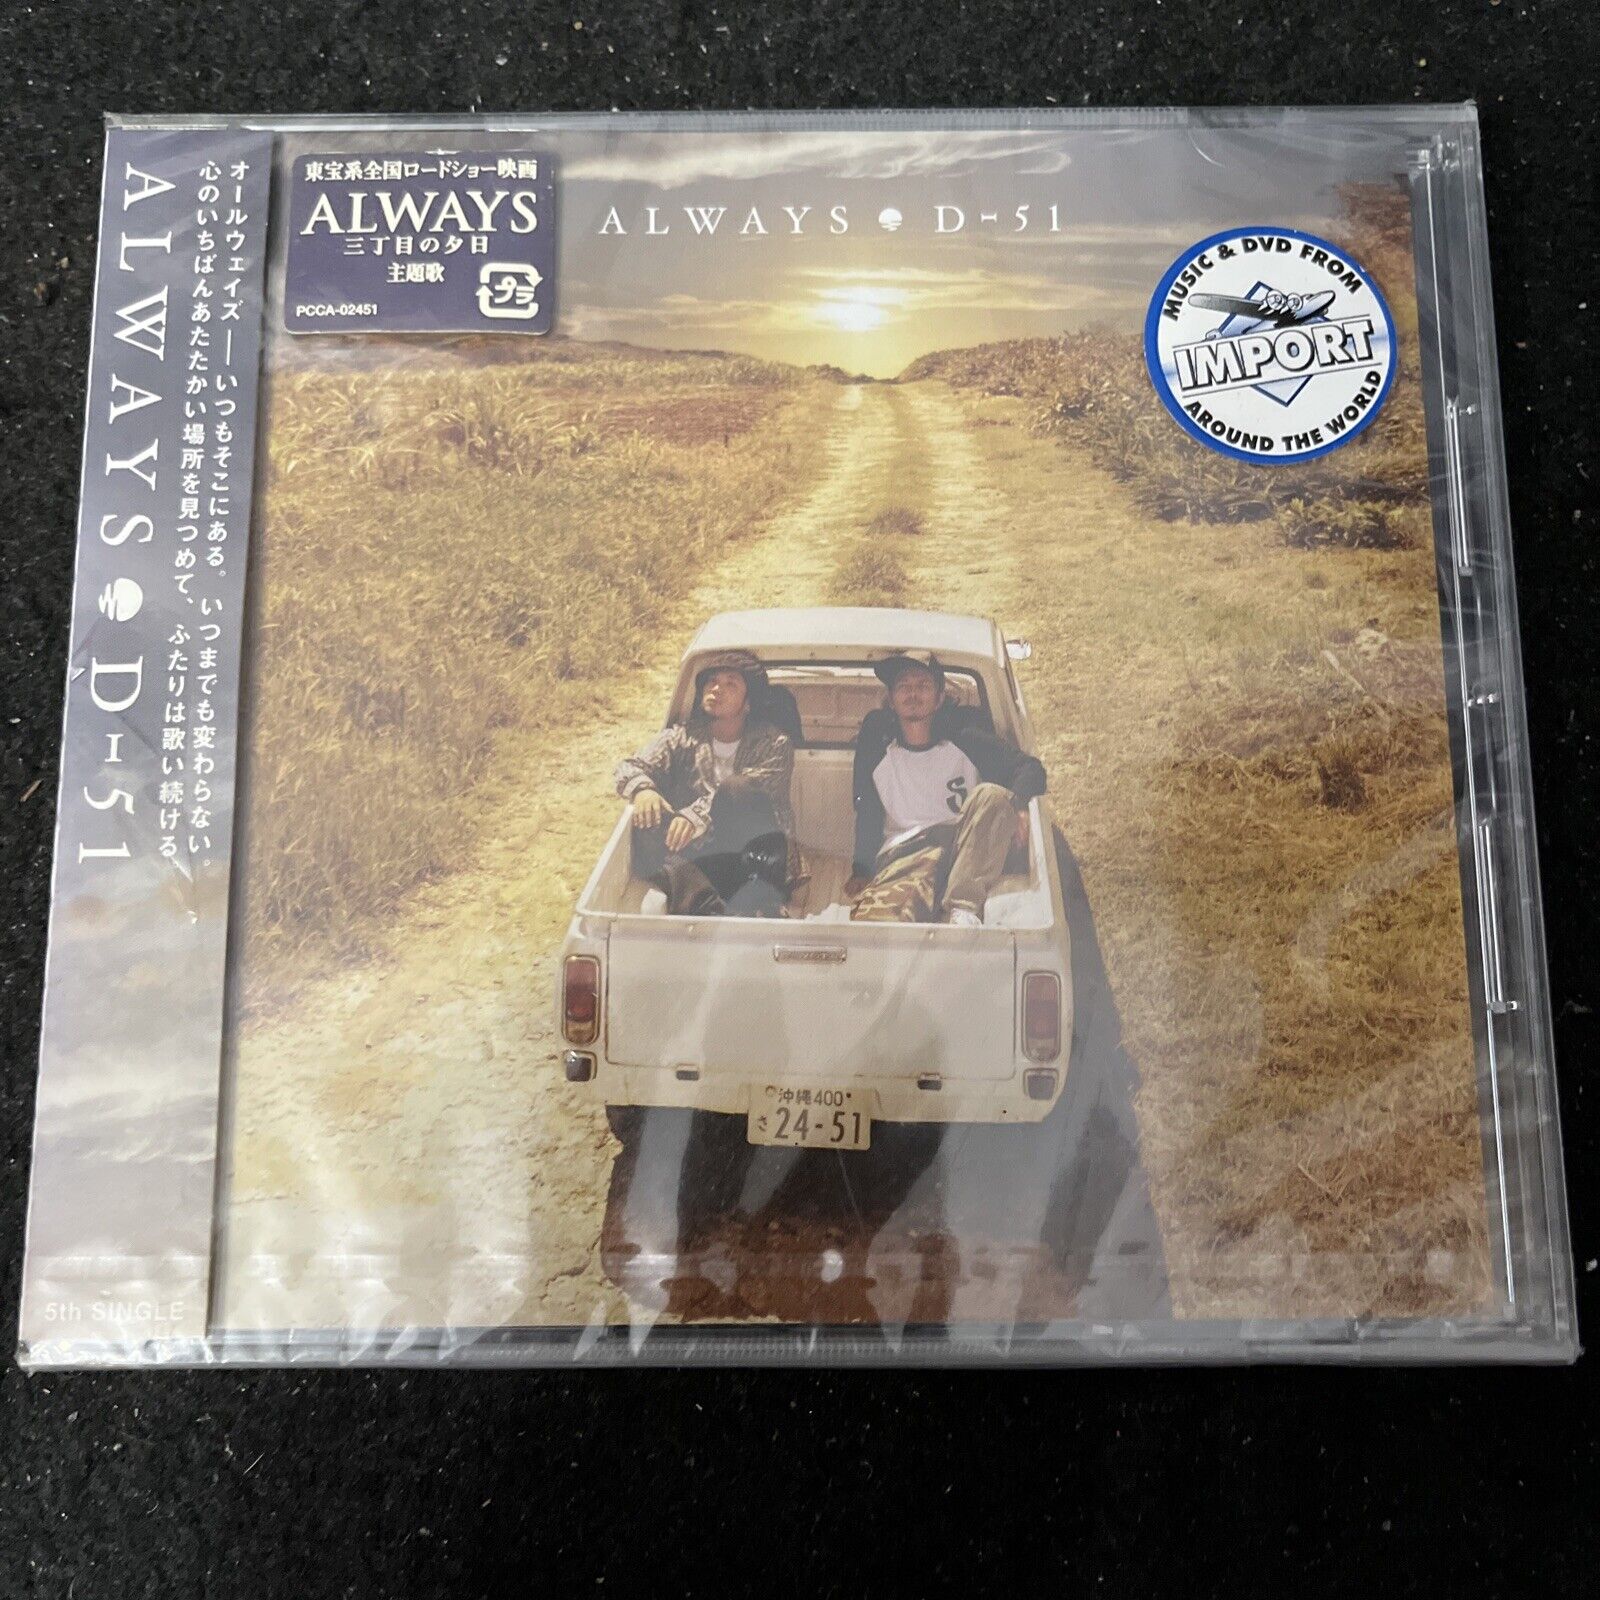 Always by D-51 CD Japanese Import. Single. Brand New, Factory Sealed